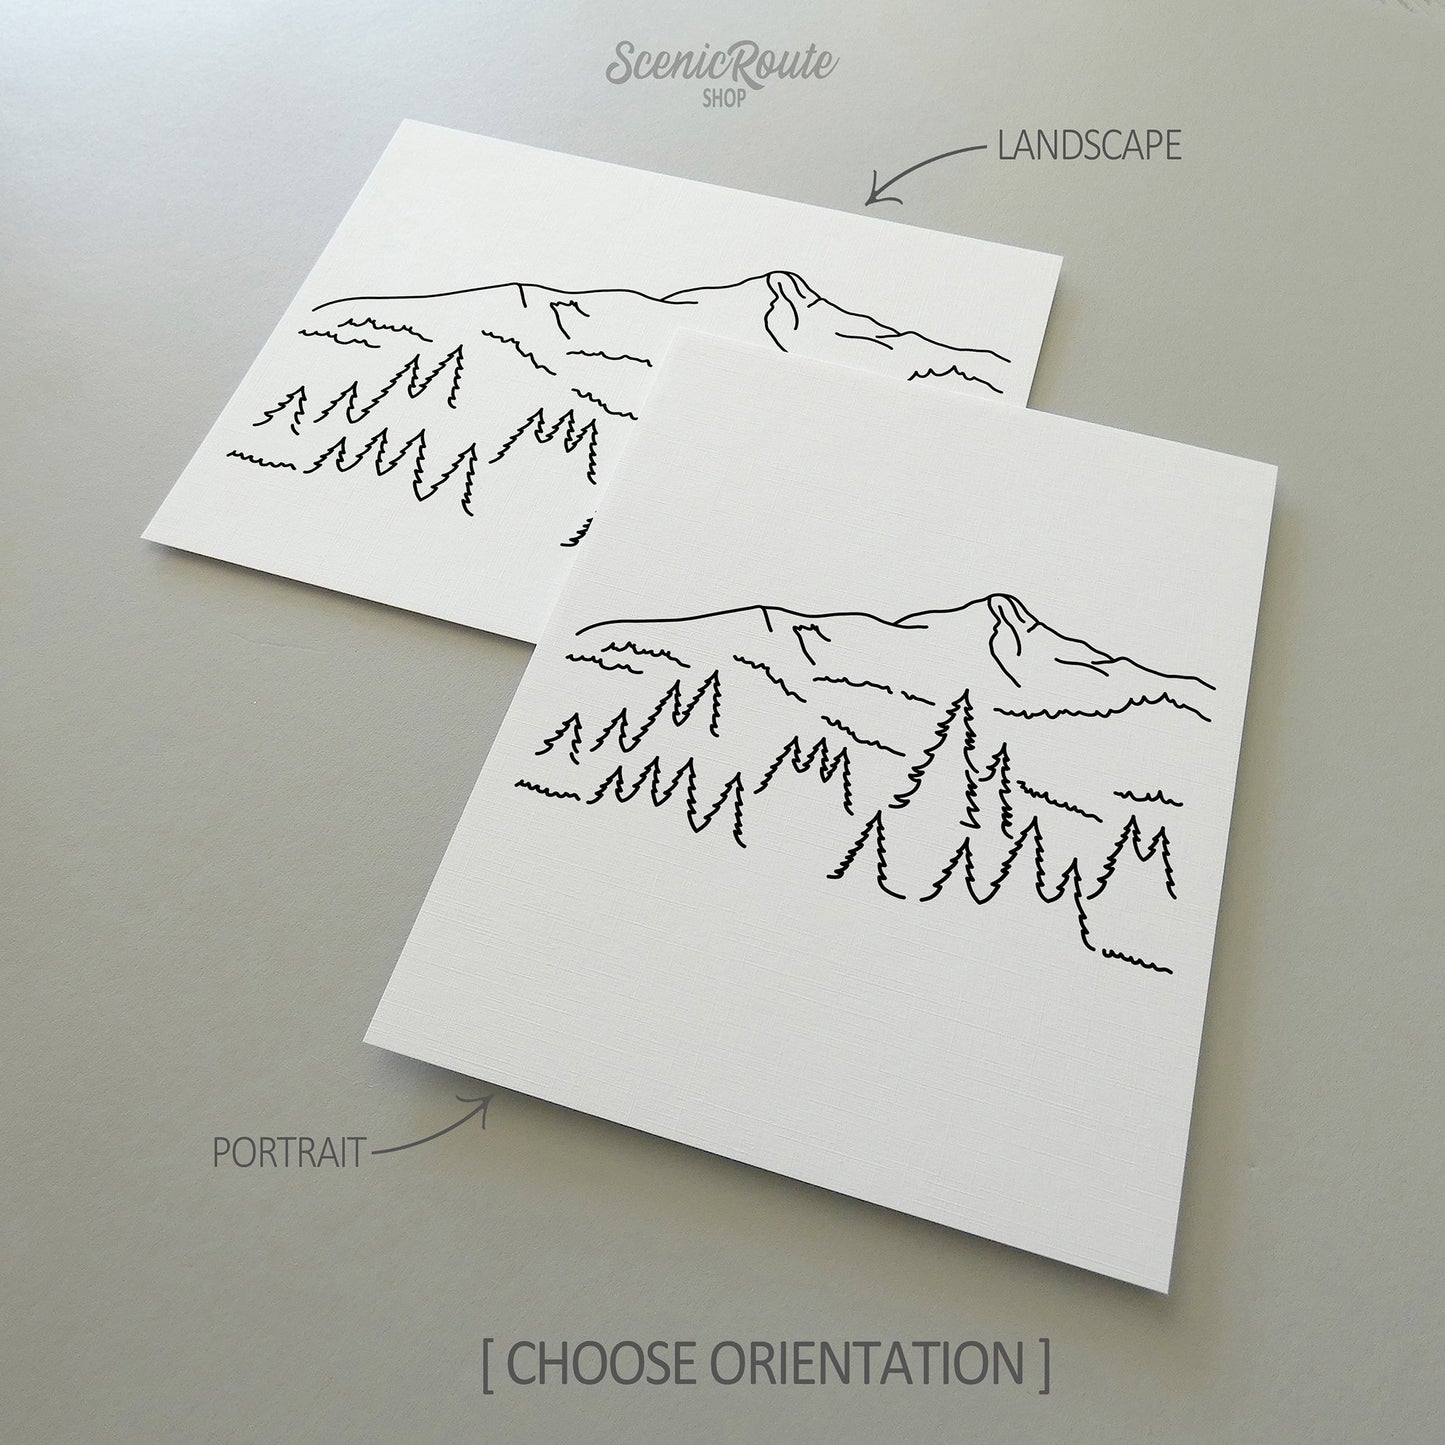 Two line art drawings of Big Sky Montana on white linen paper with a gray background.  The pieces are shown in portrait and landscape orientation for the available art print options.